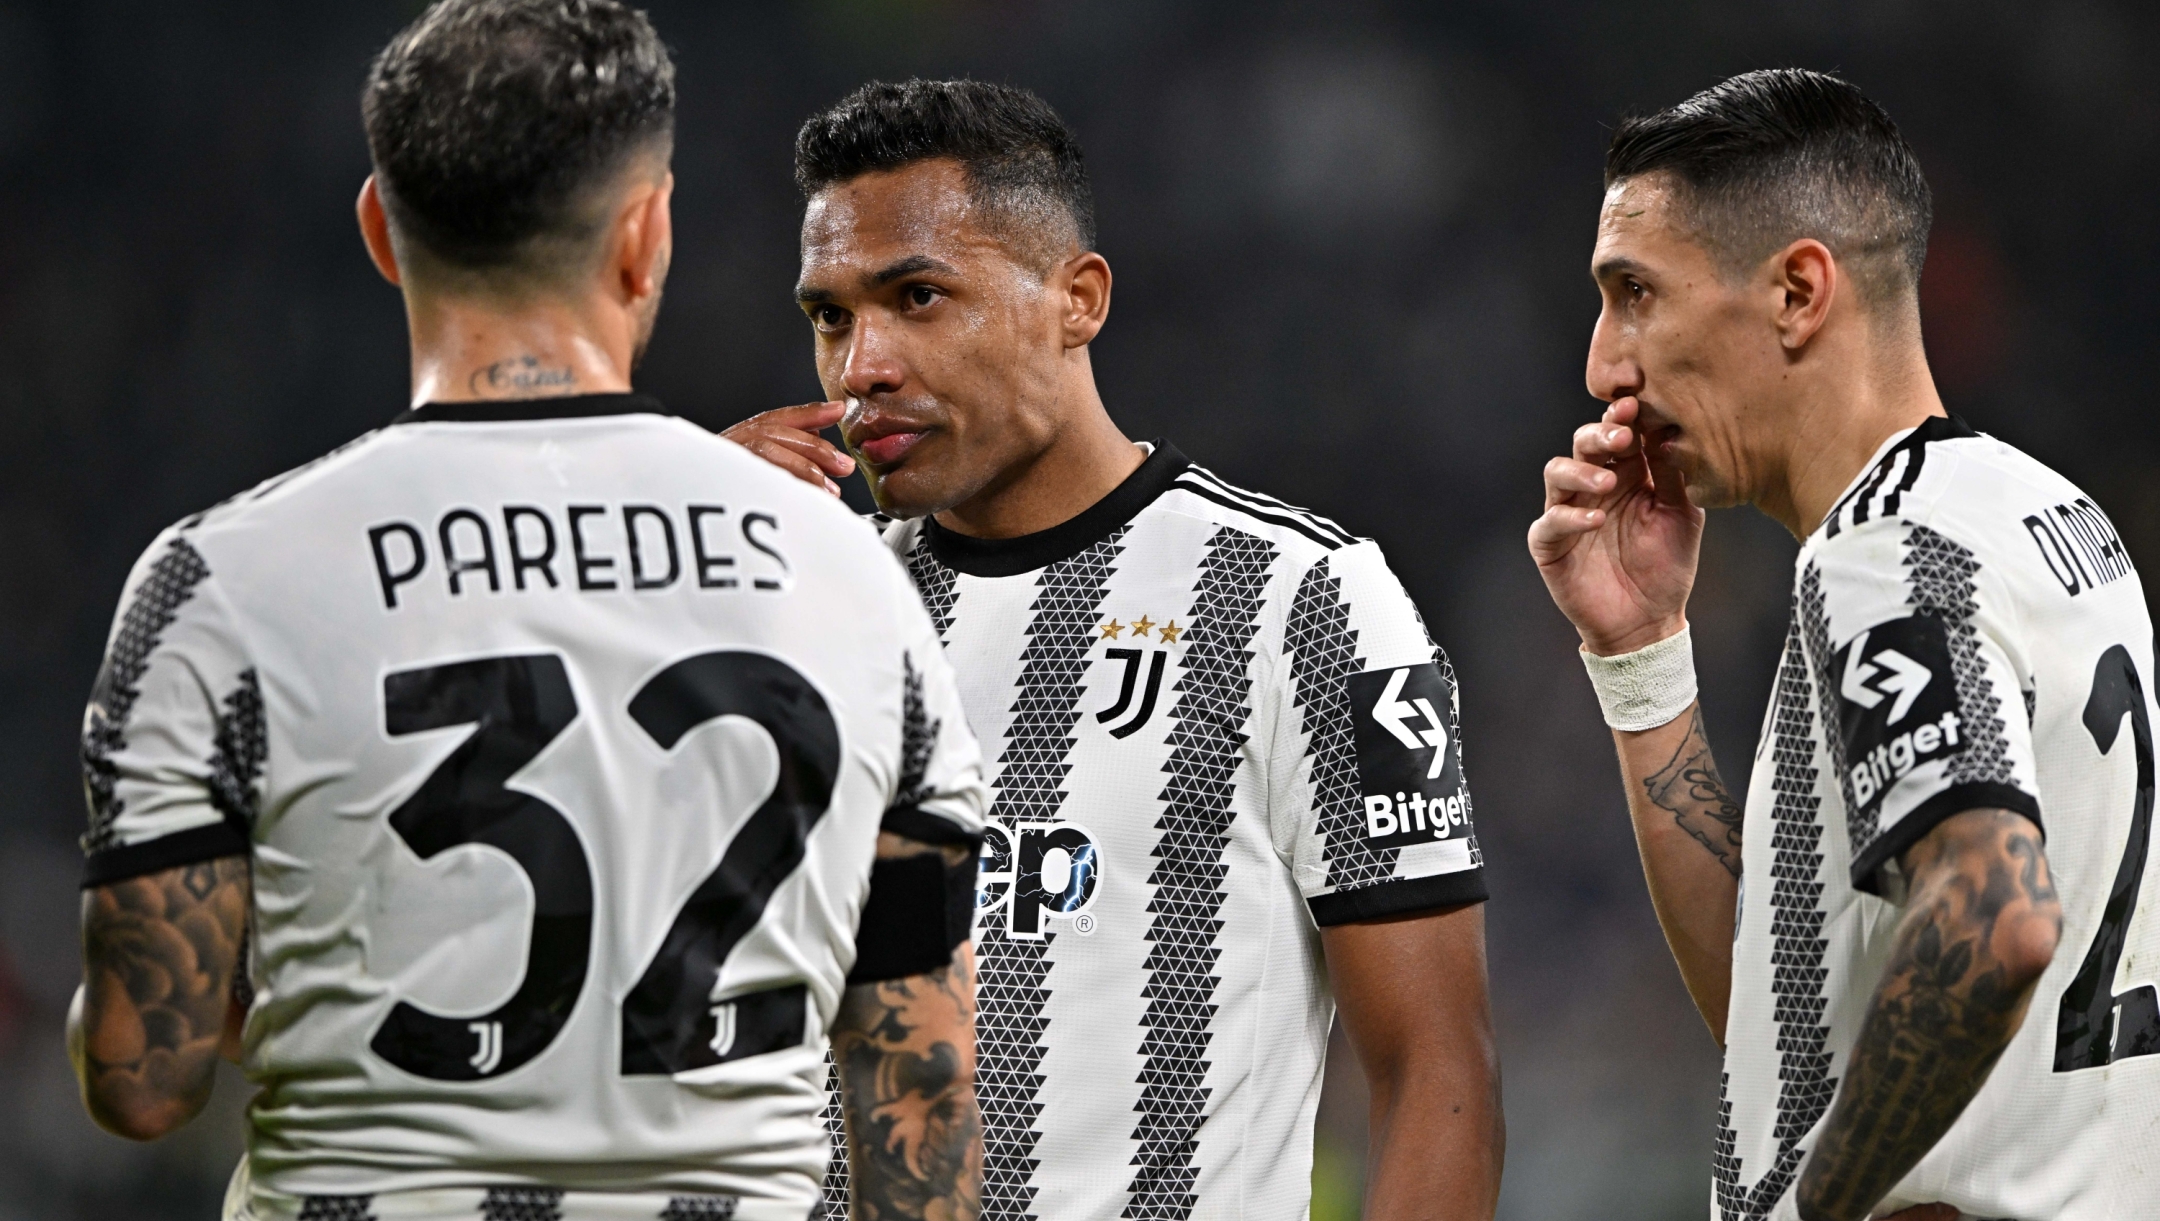 TURIN, ITALY - FEBRUARY 16: Leandro Paredes, Alex Sandro and Angel Di Maria of Juventus speak to each other during the UEFA Europa League knockout round play-off leg one match between Juventus and FC Nantes at Allianz Stadium on February 16, 2023 in Turin, Italy. (Photo by Chris Ricco - Juventus FC/Juventus FC via Getty Images)